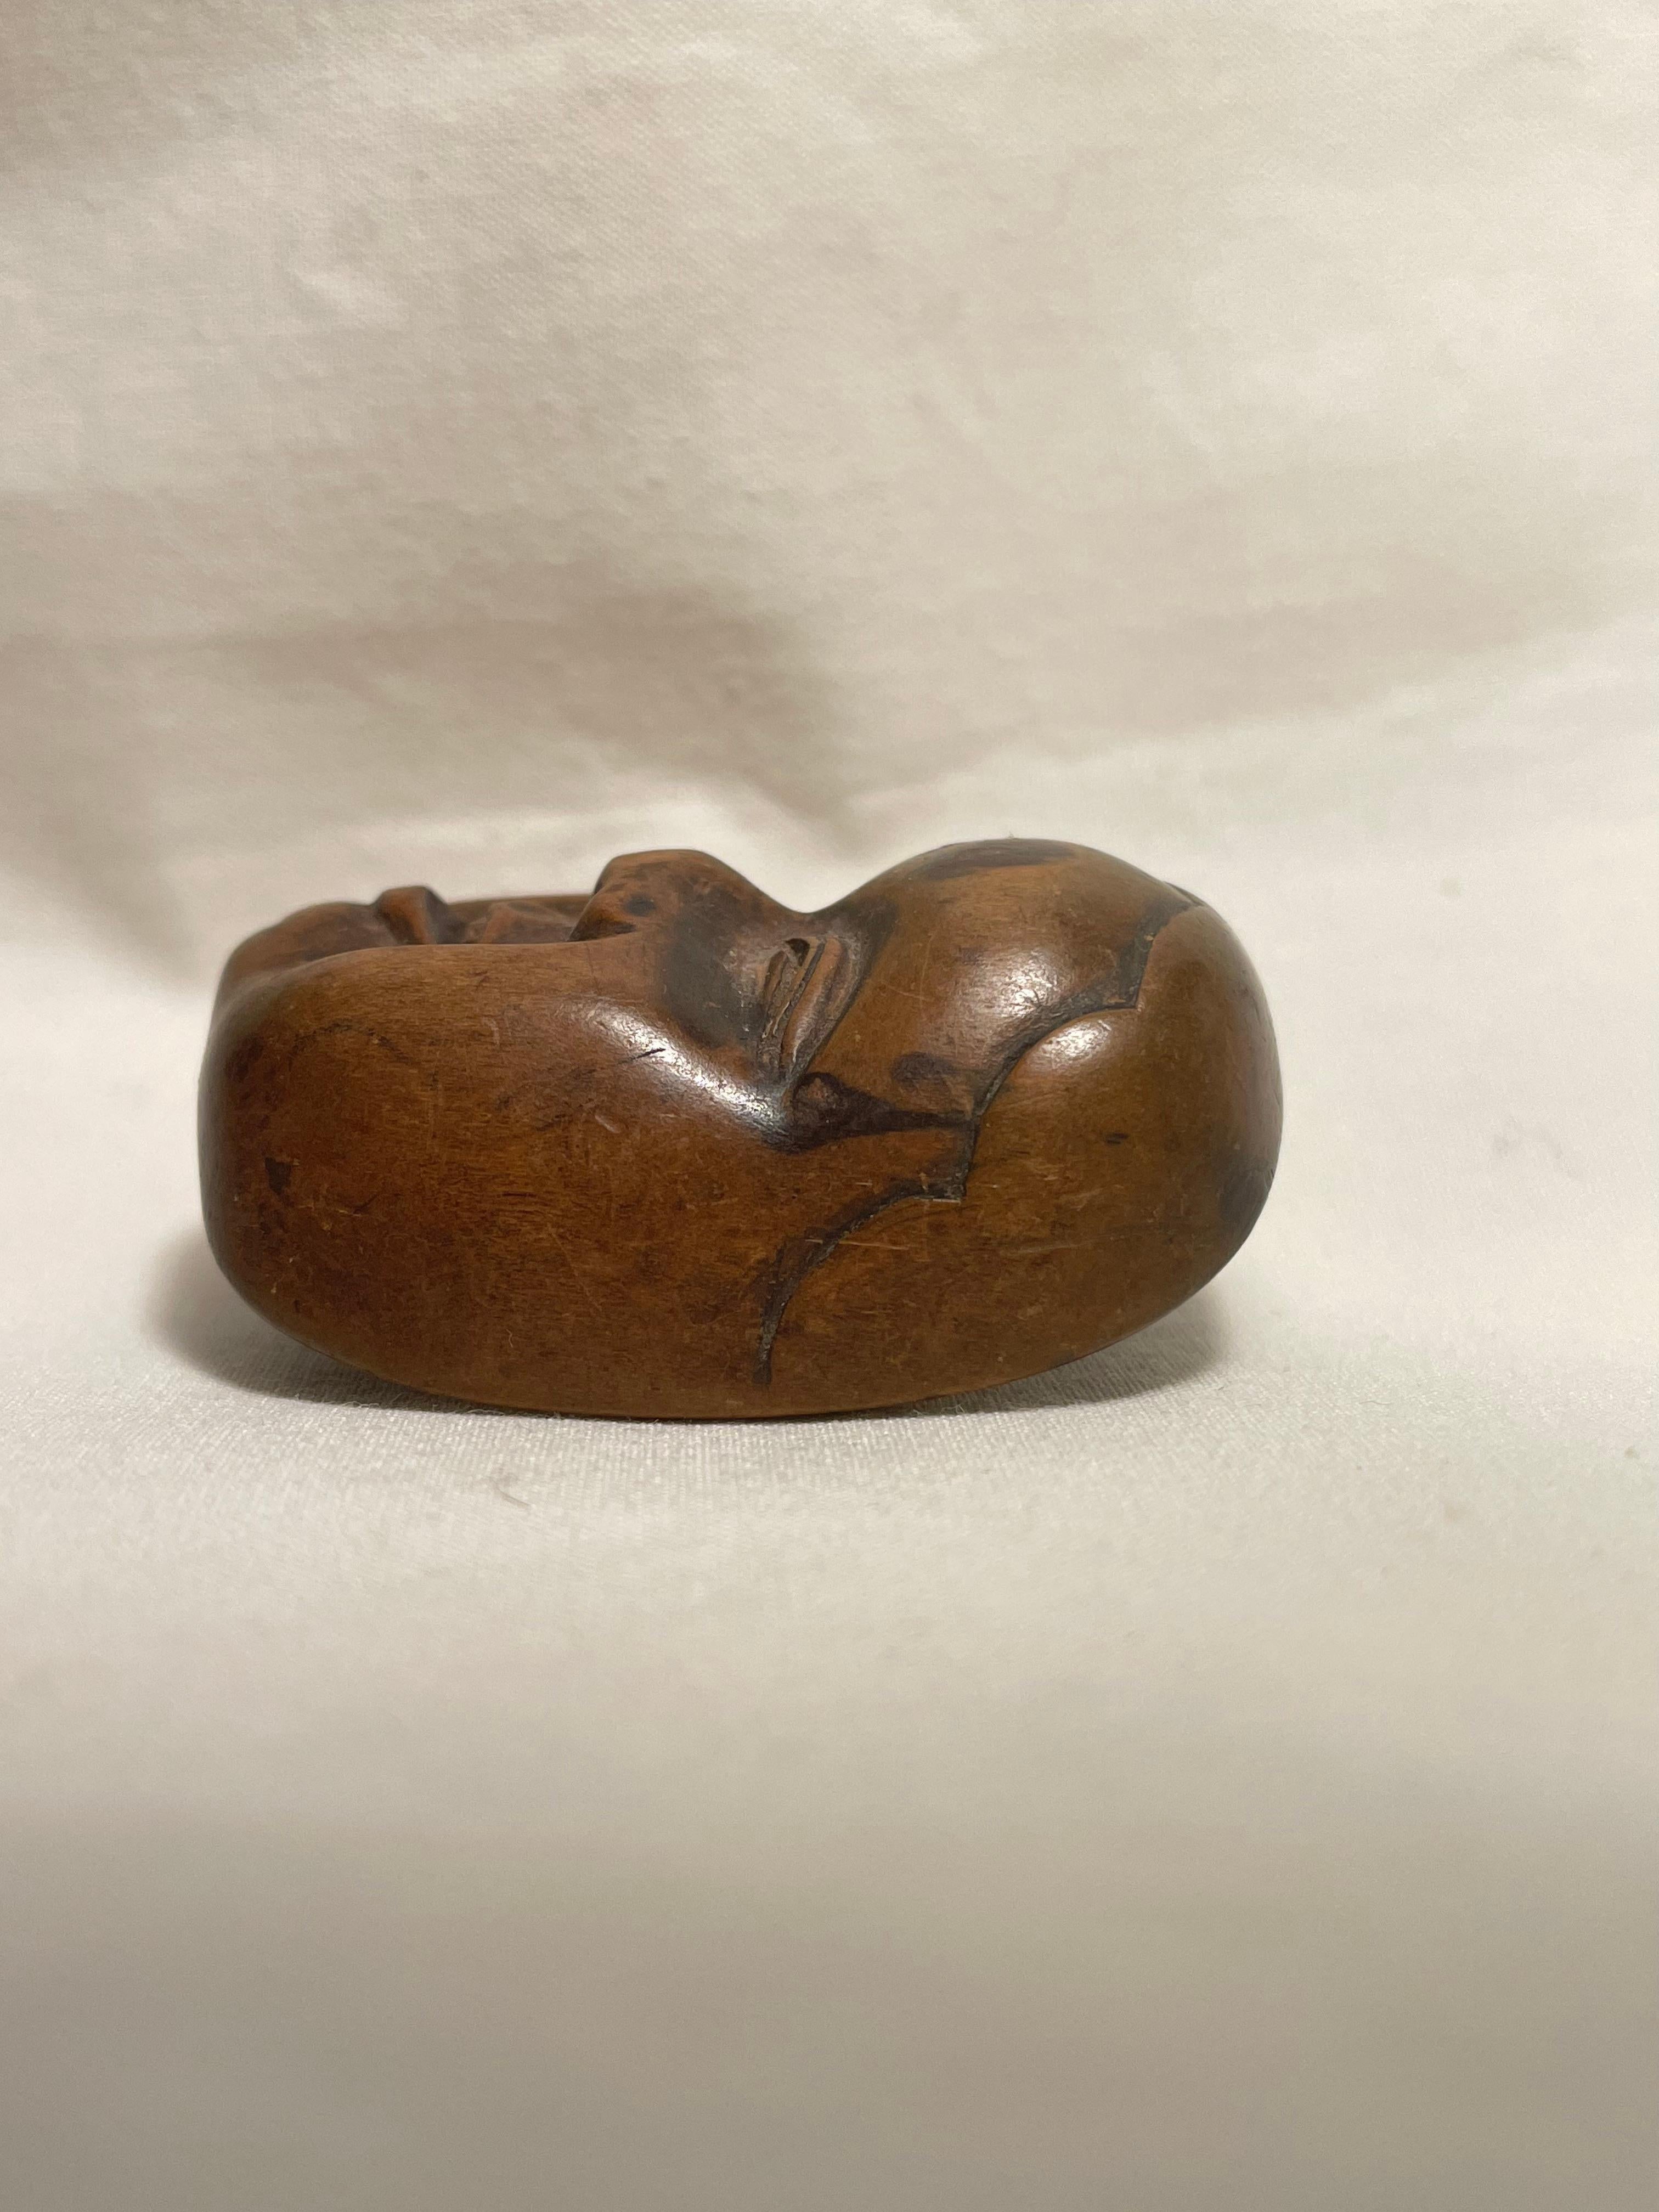 This is an antique netsuke made in Japan around Showa period 1950s.

Dimensions: 4.5 x 3.5 x H2.2 cm
Sculpture: Onnamen 
Era: 1950s (Showa) 

Netsuke is a miniature sculpture, originating in 17th century Japan.
Initially a simply-carved button